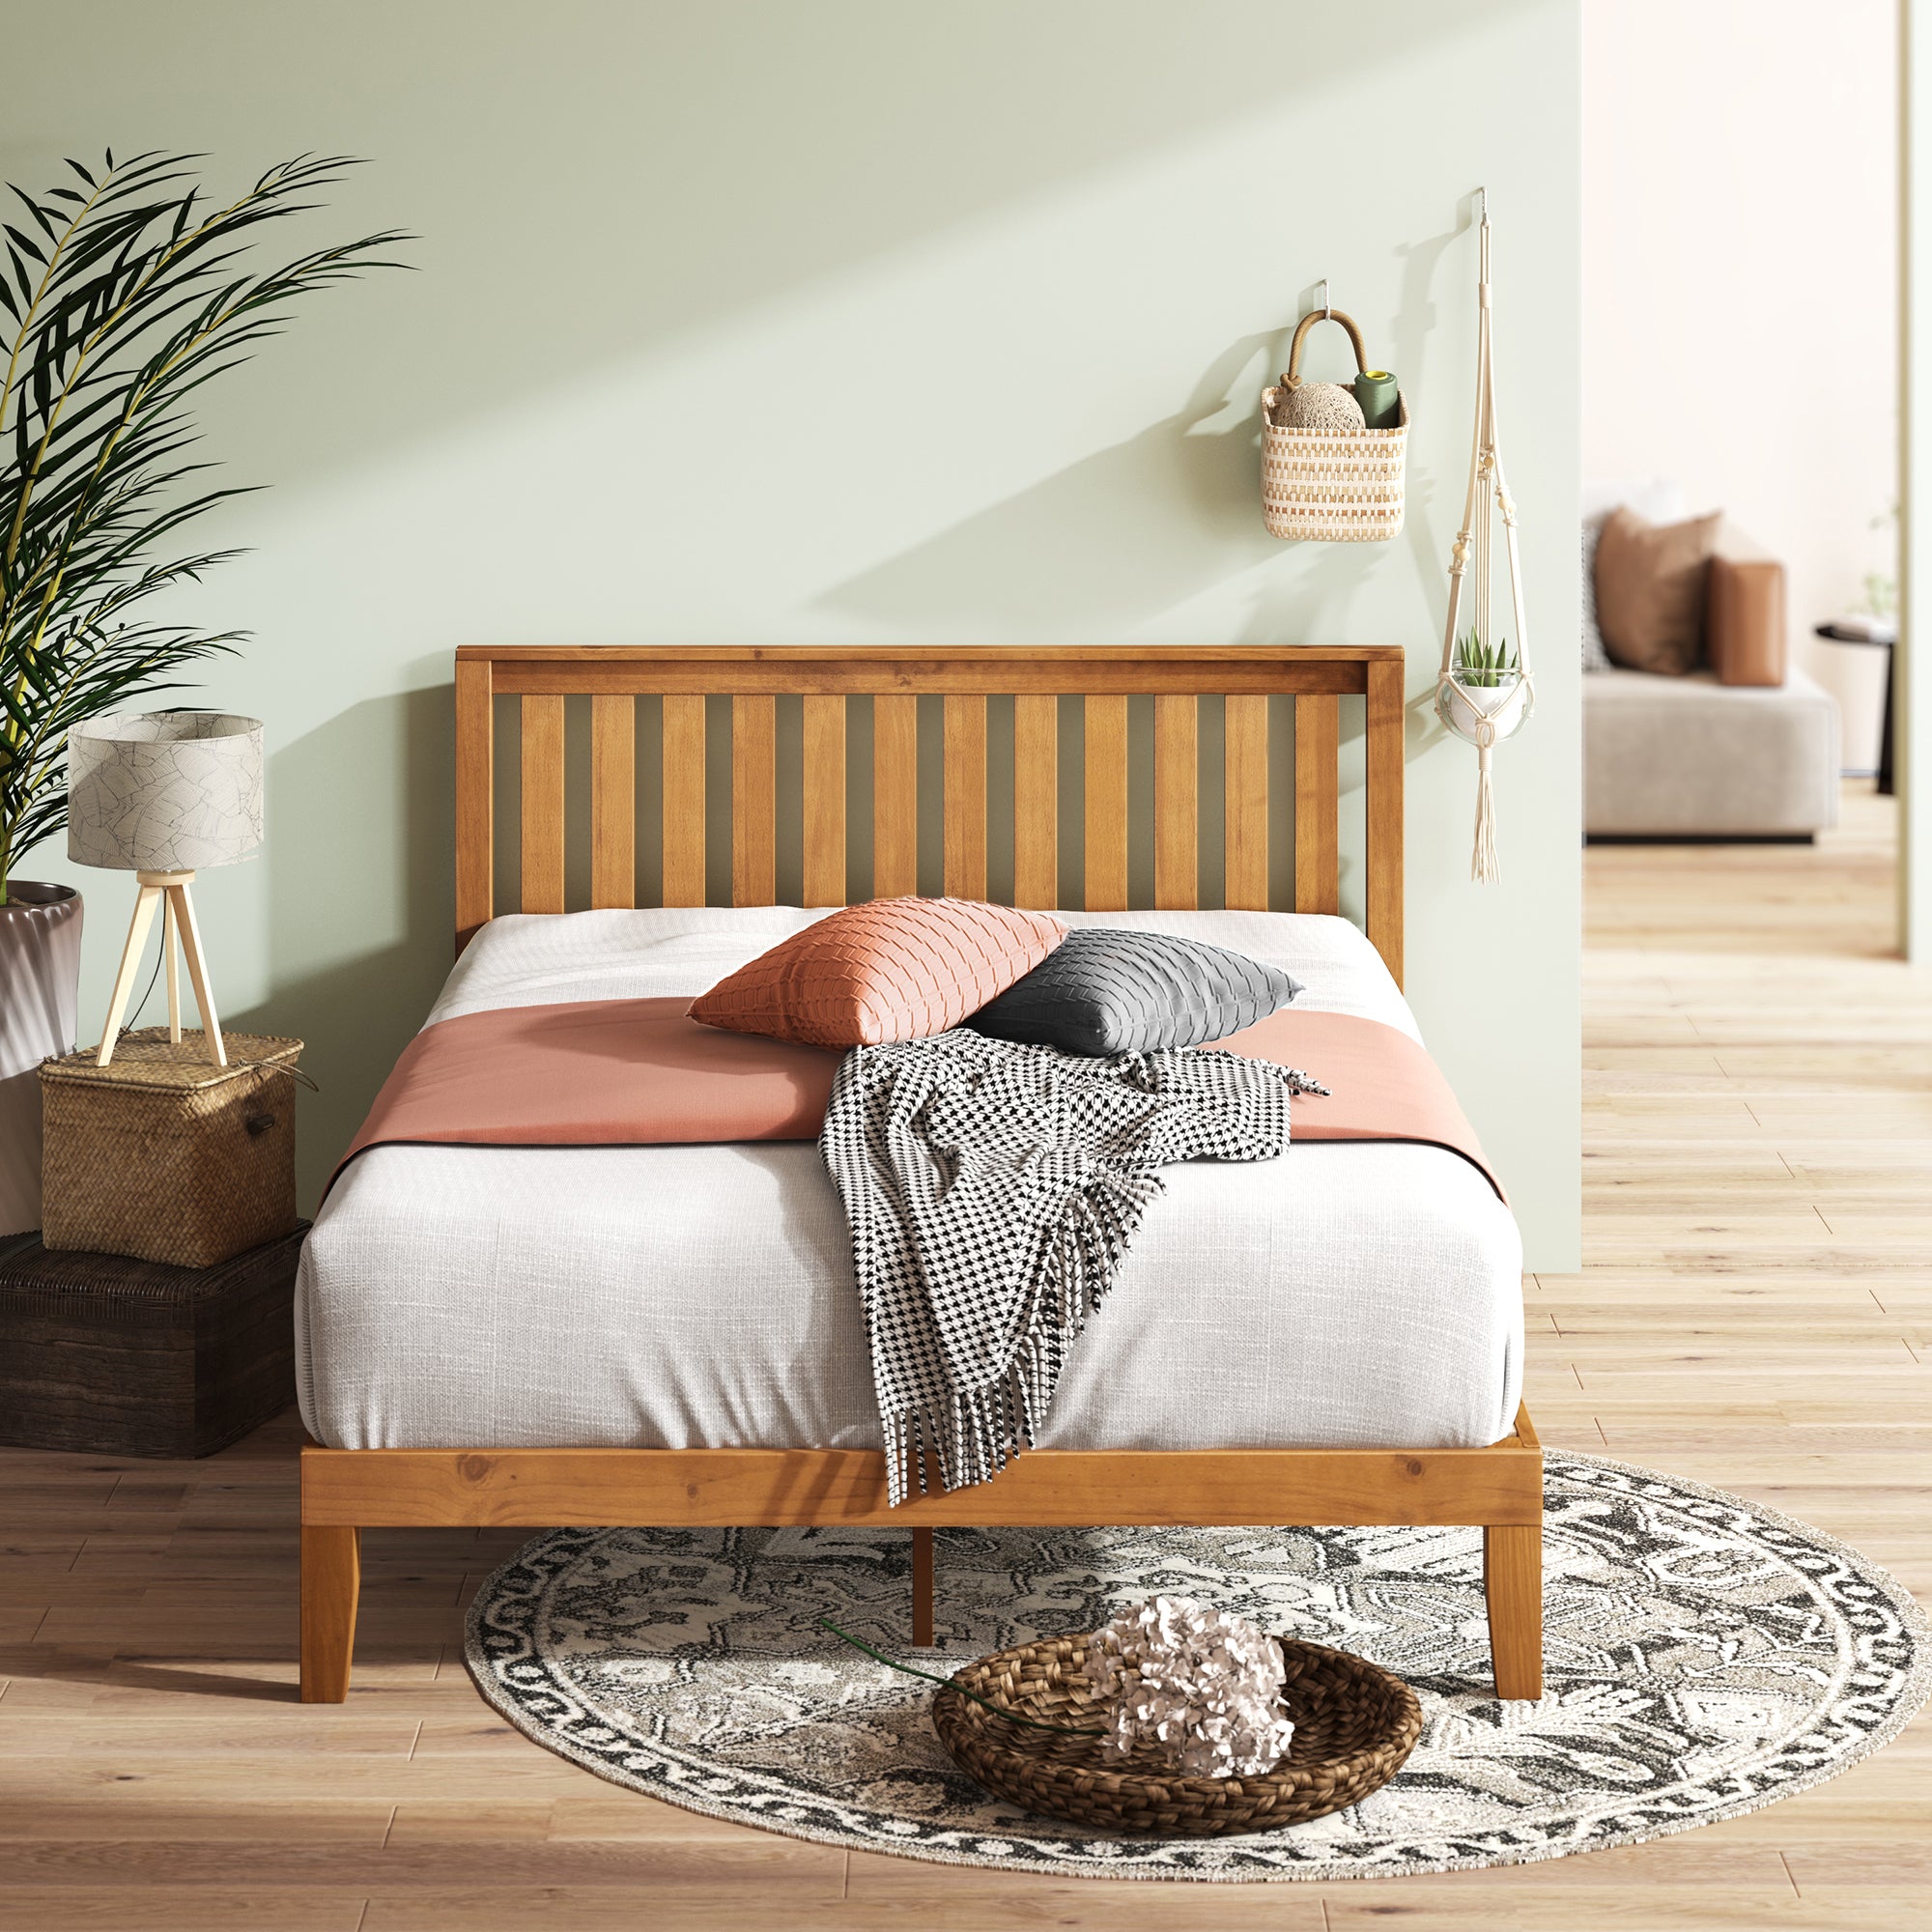 Alexia Wood Platform Bed Frame with Headboard